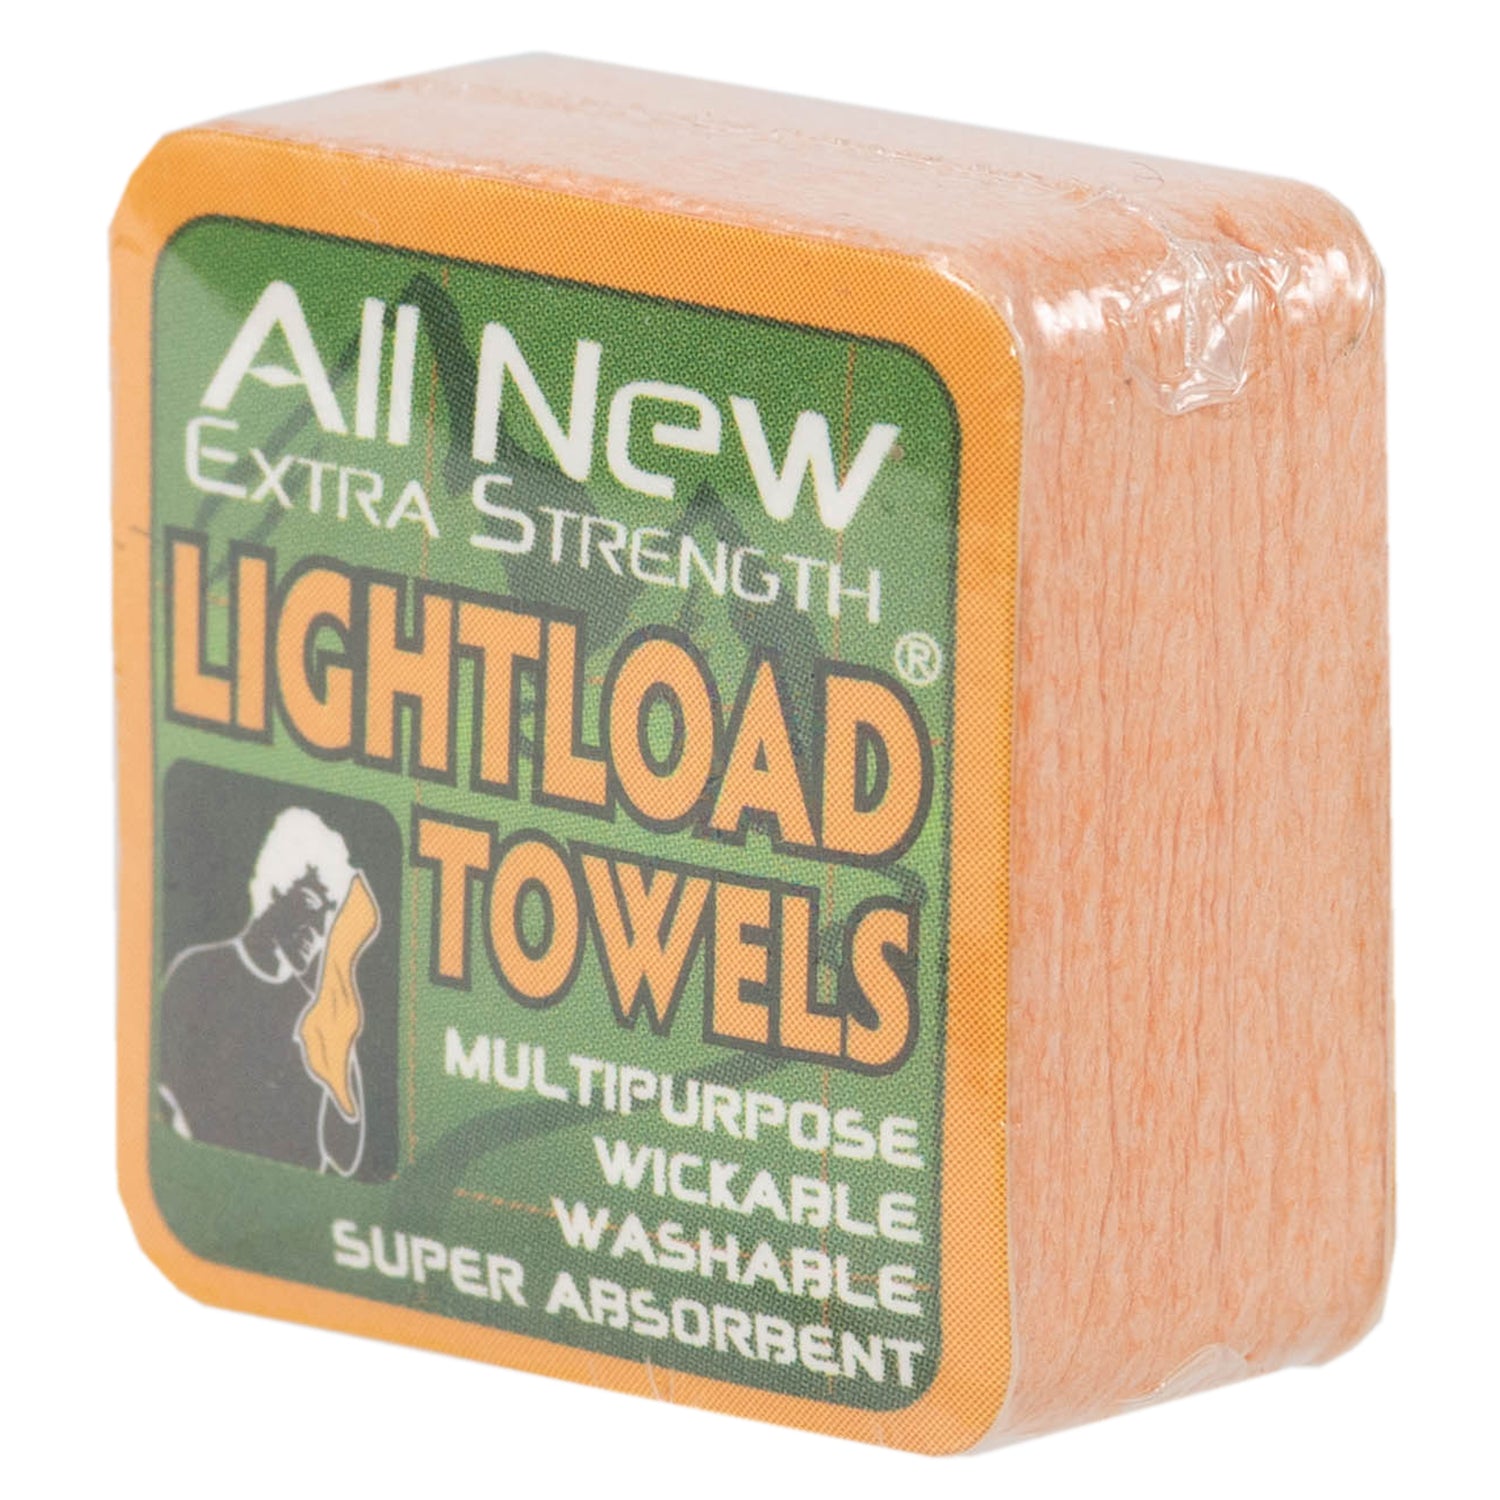 LIGHTLOAD TOWELS Extra Strength Towel